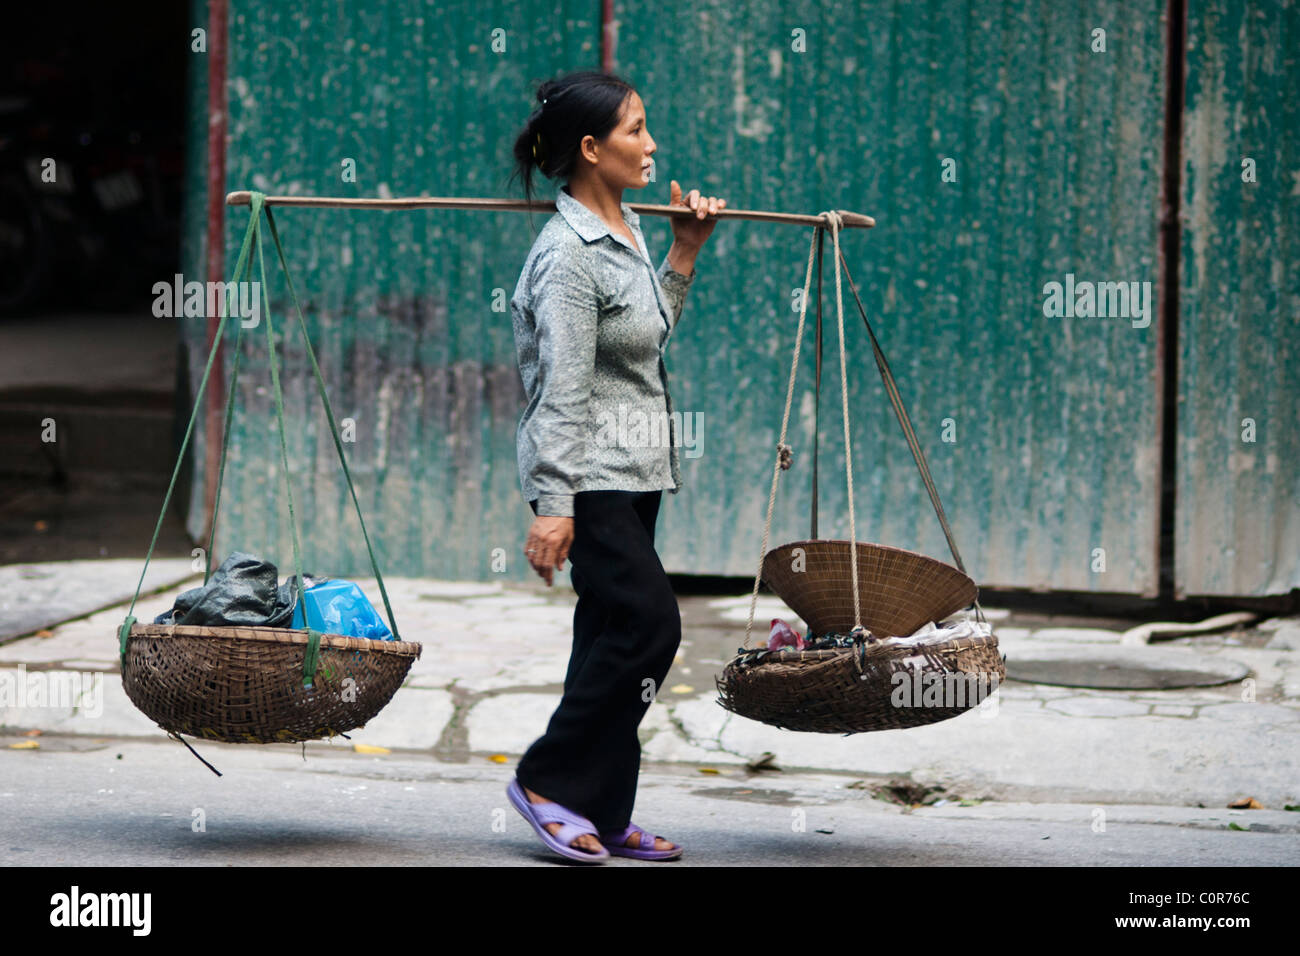 Vietnamese woman caring rubbish in the baskets on a way back from the market Stock Photo